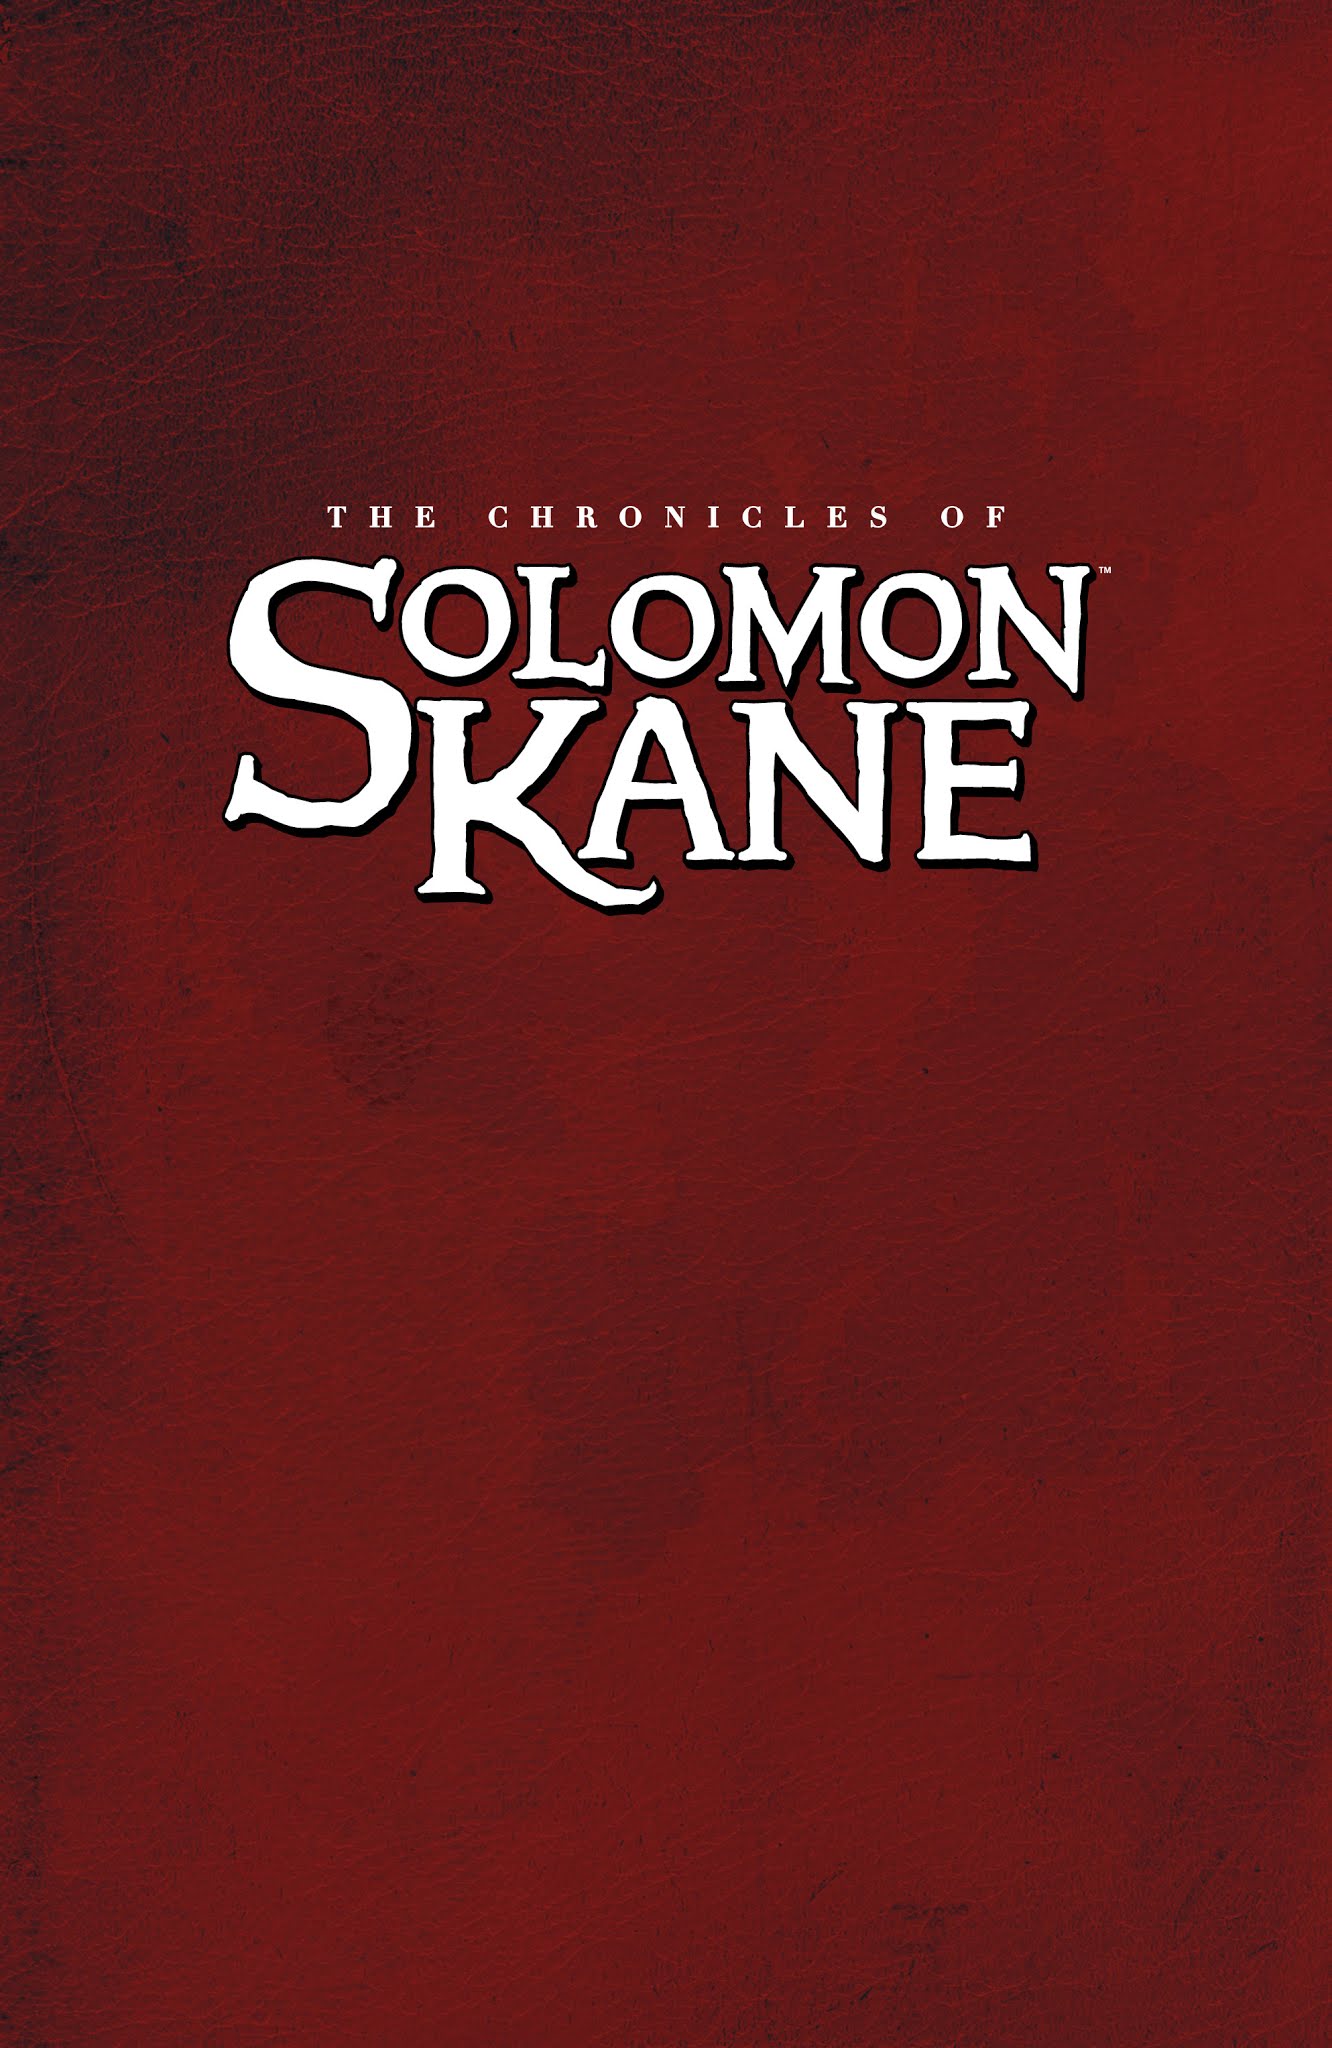 Read online The Chronicles of Solomon Kane comic -  Issue # TPB (Part 1) - 3